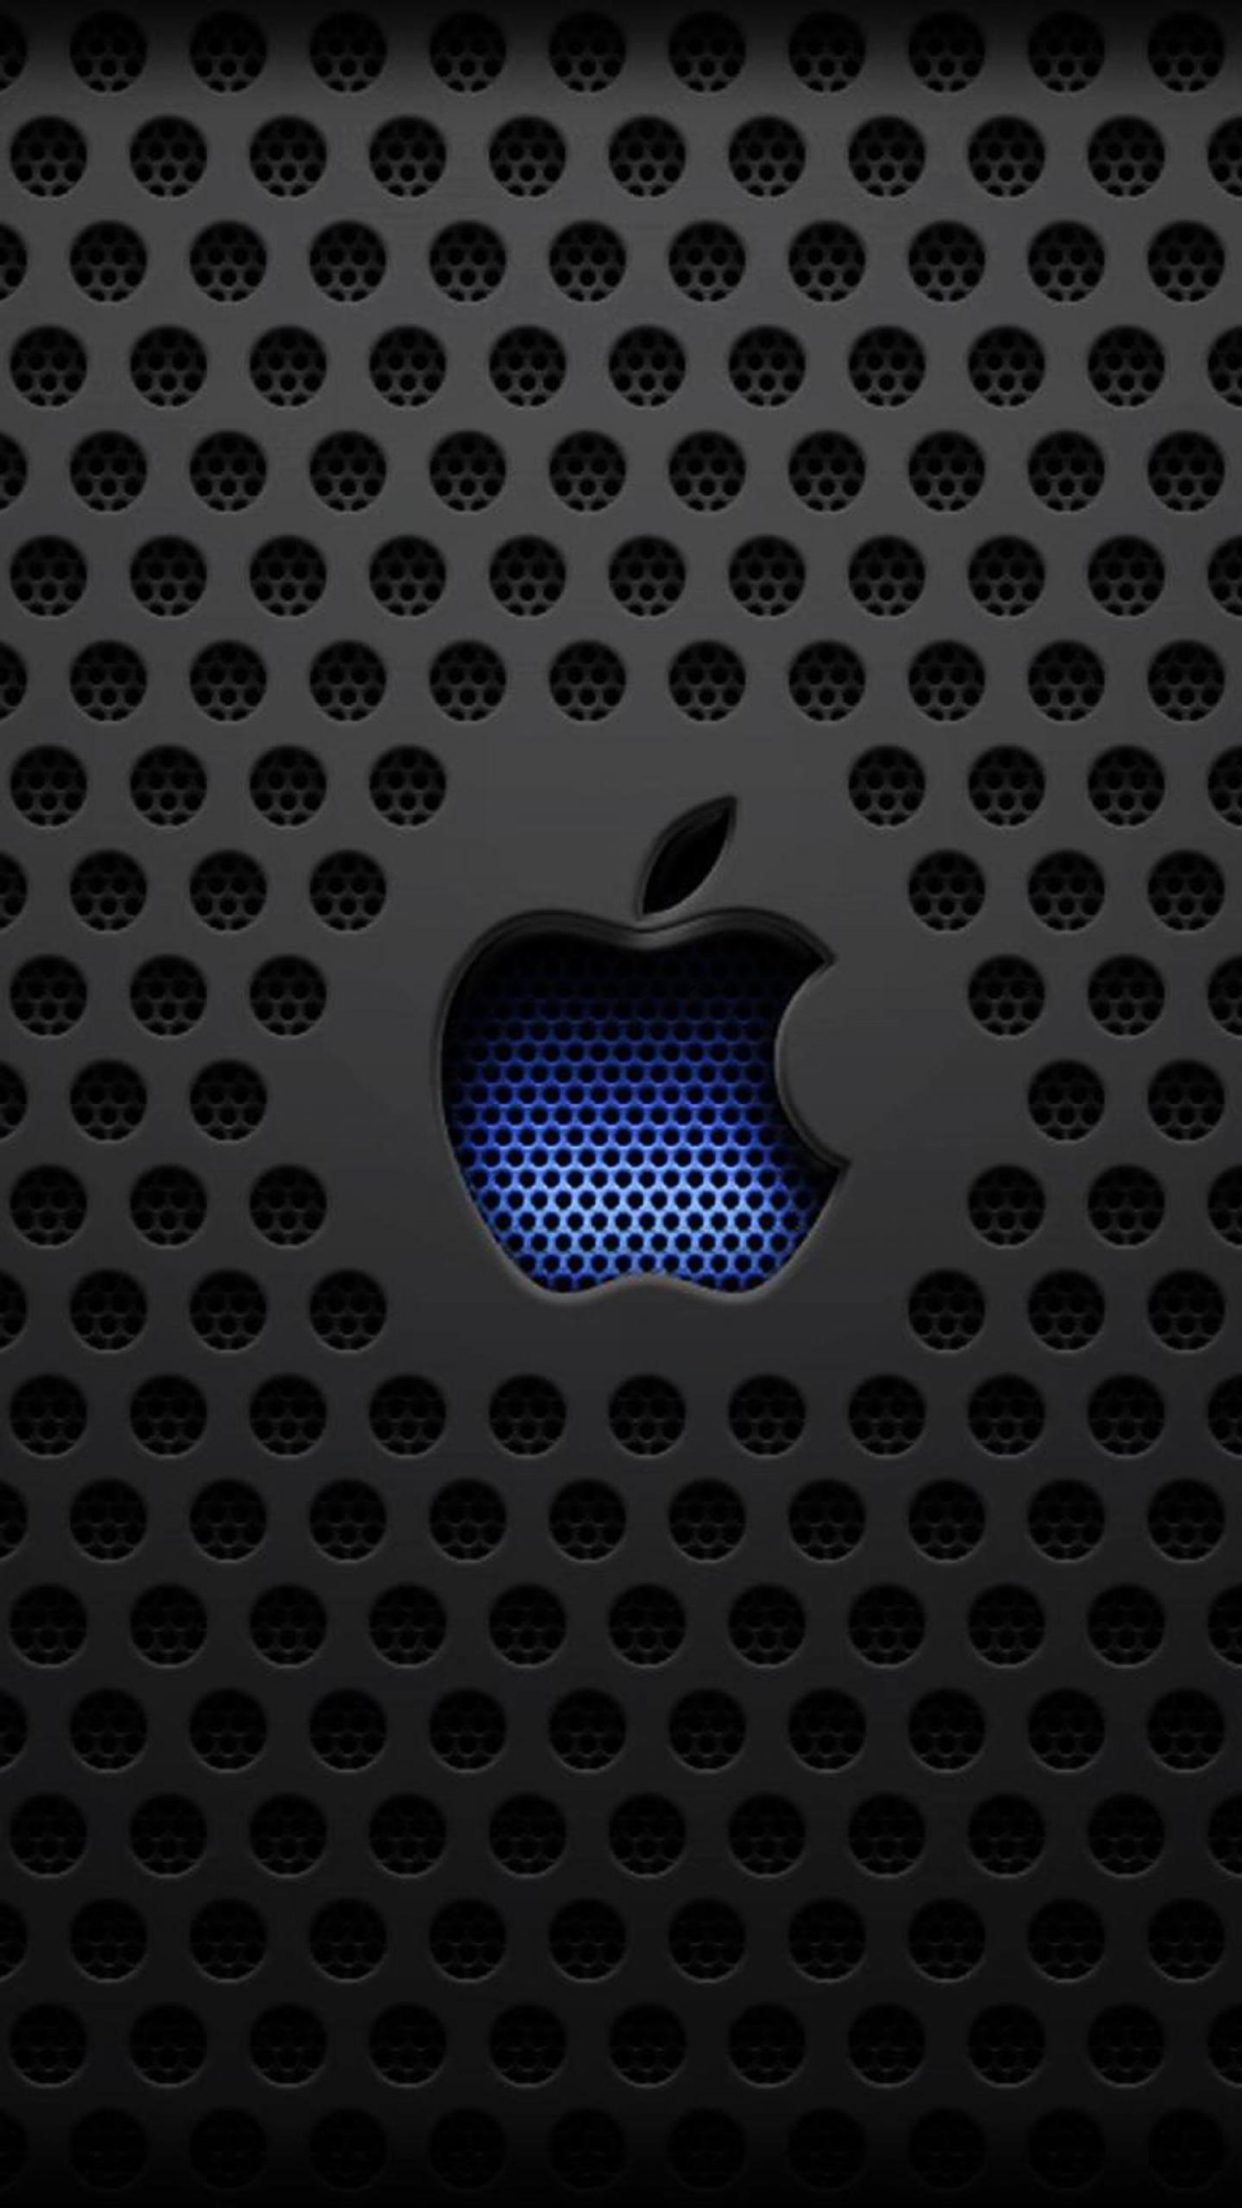 Apple Logo 3d All Resoluations Wallpaper Free Download – HD Wallpapers Backgrounds Desktop, iphone & Android Free Download